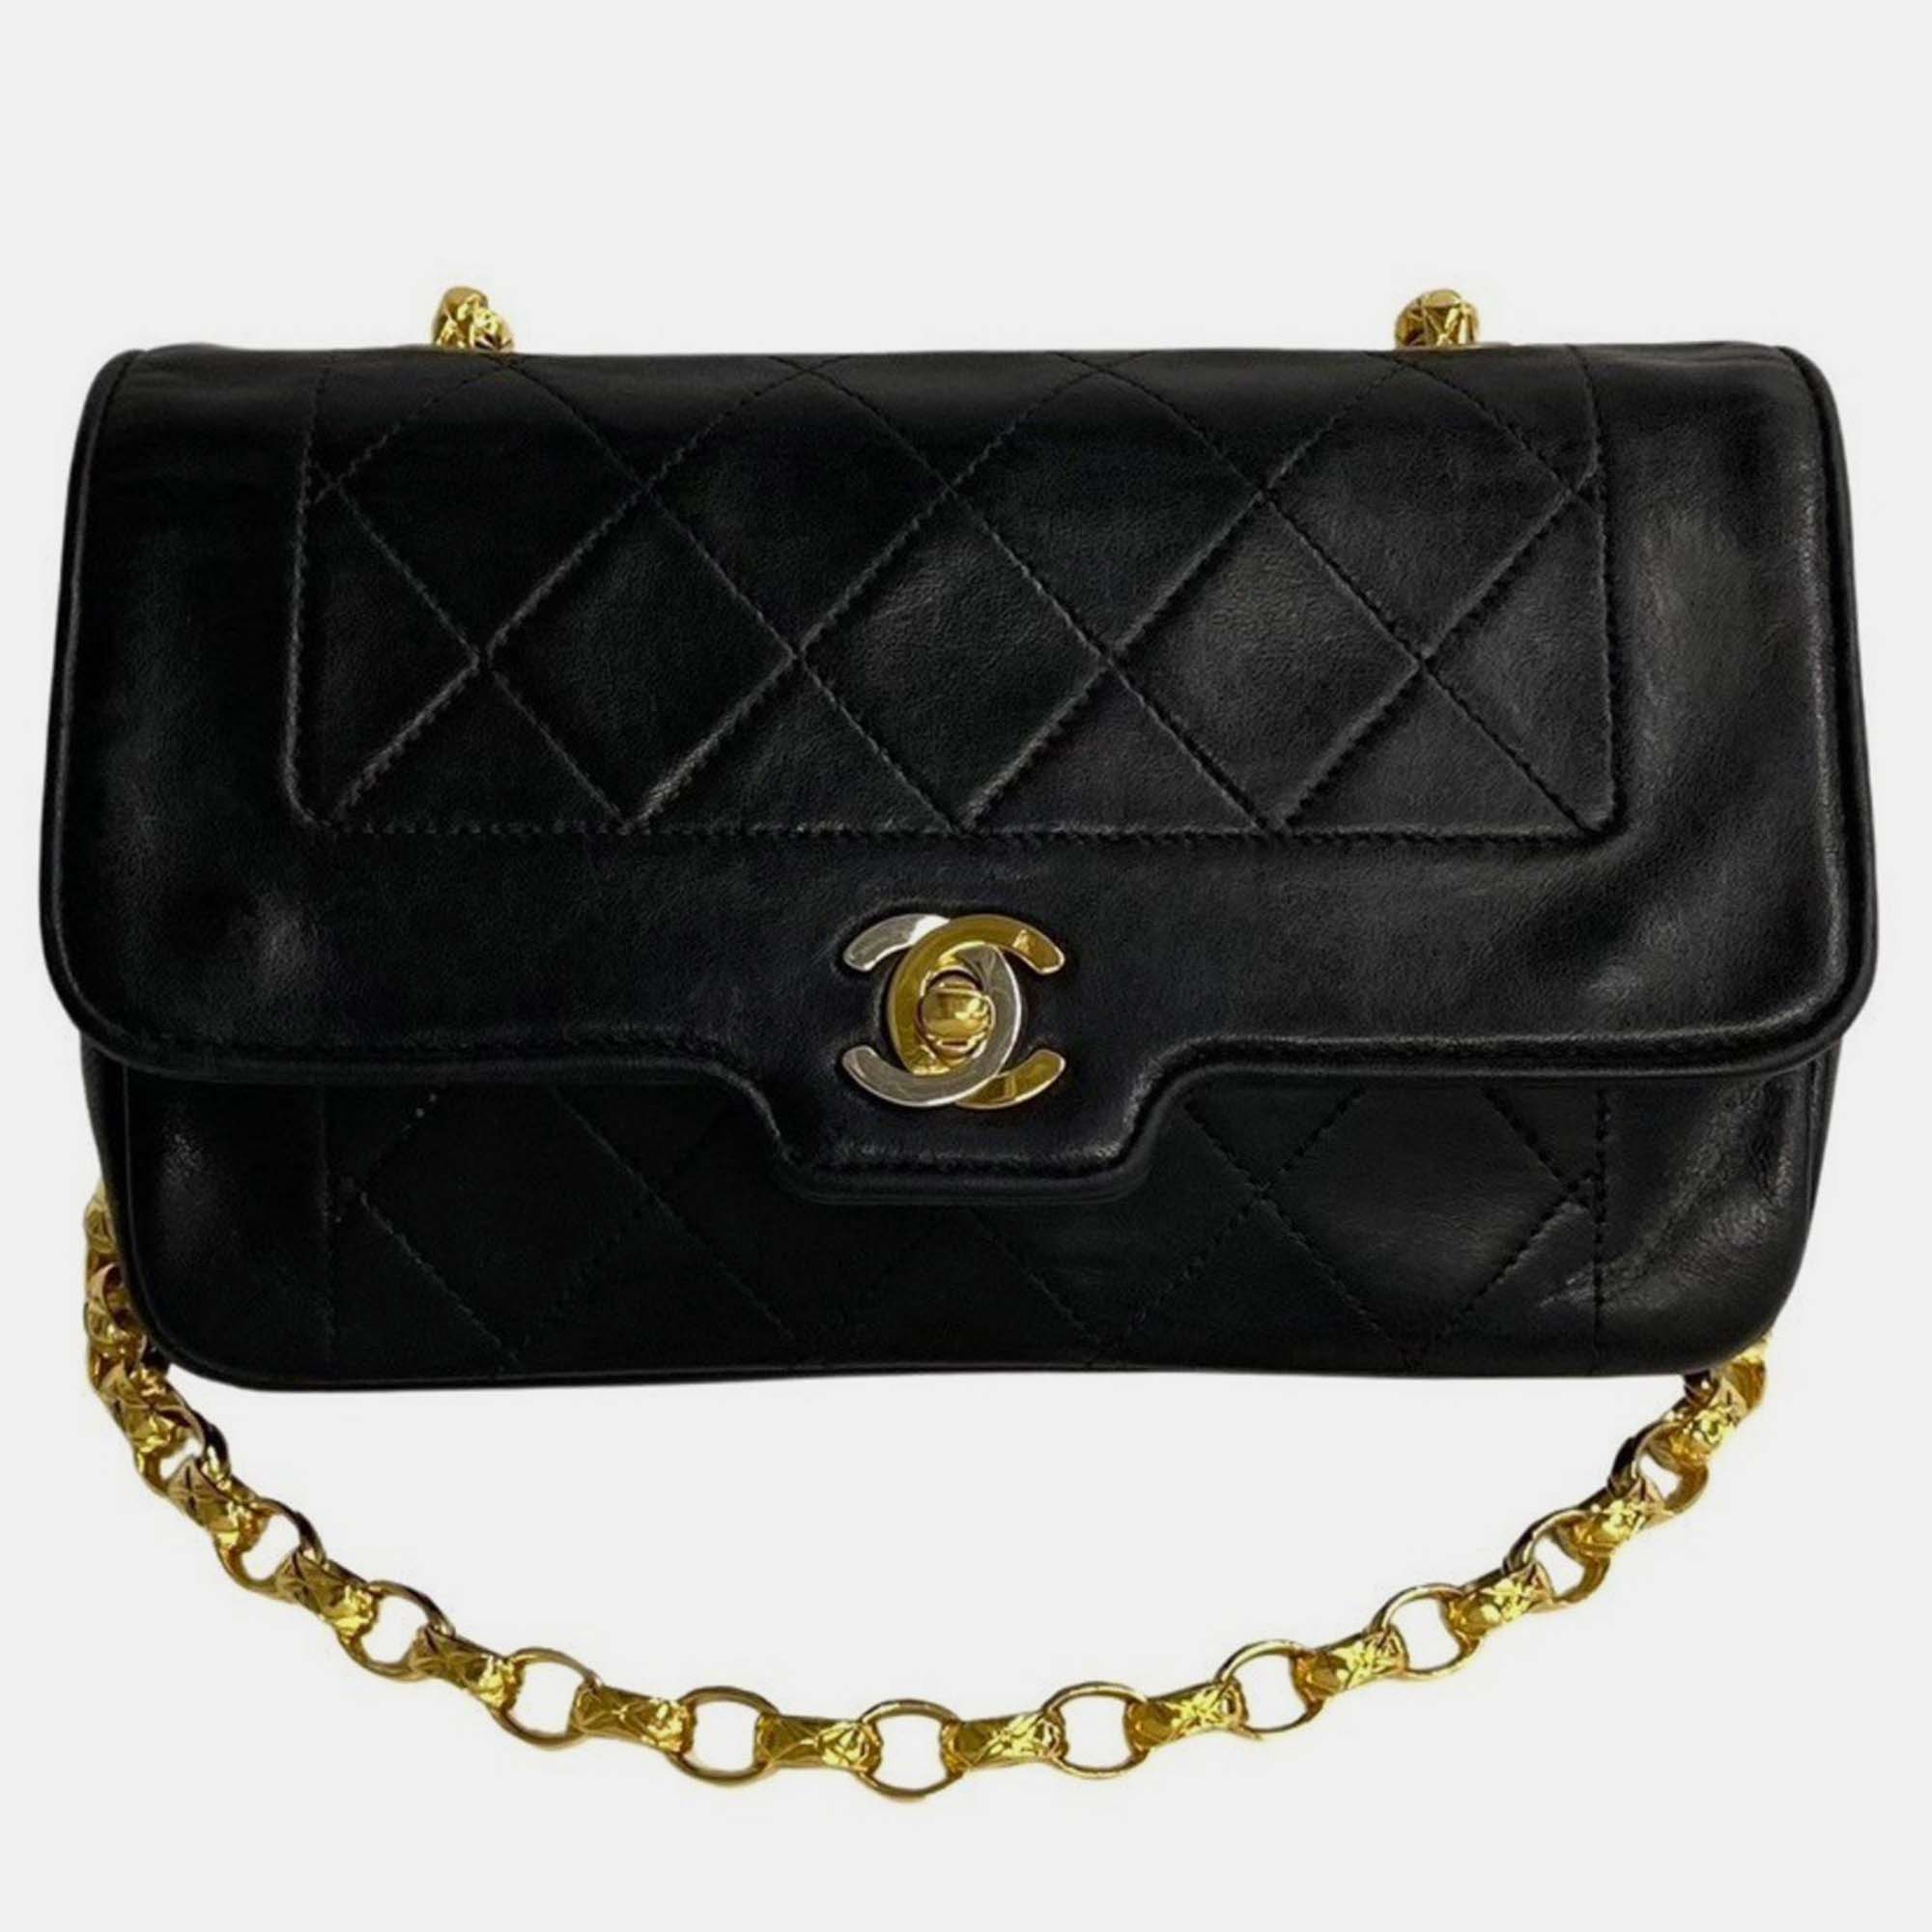 Indulge in timeless elegance with this Chanel bag meticulously crafted to perfection. Its exquisite details and luxurious materials make it a statement piece for any sophisticated ensemble.